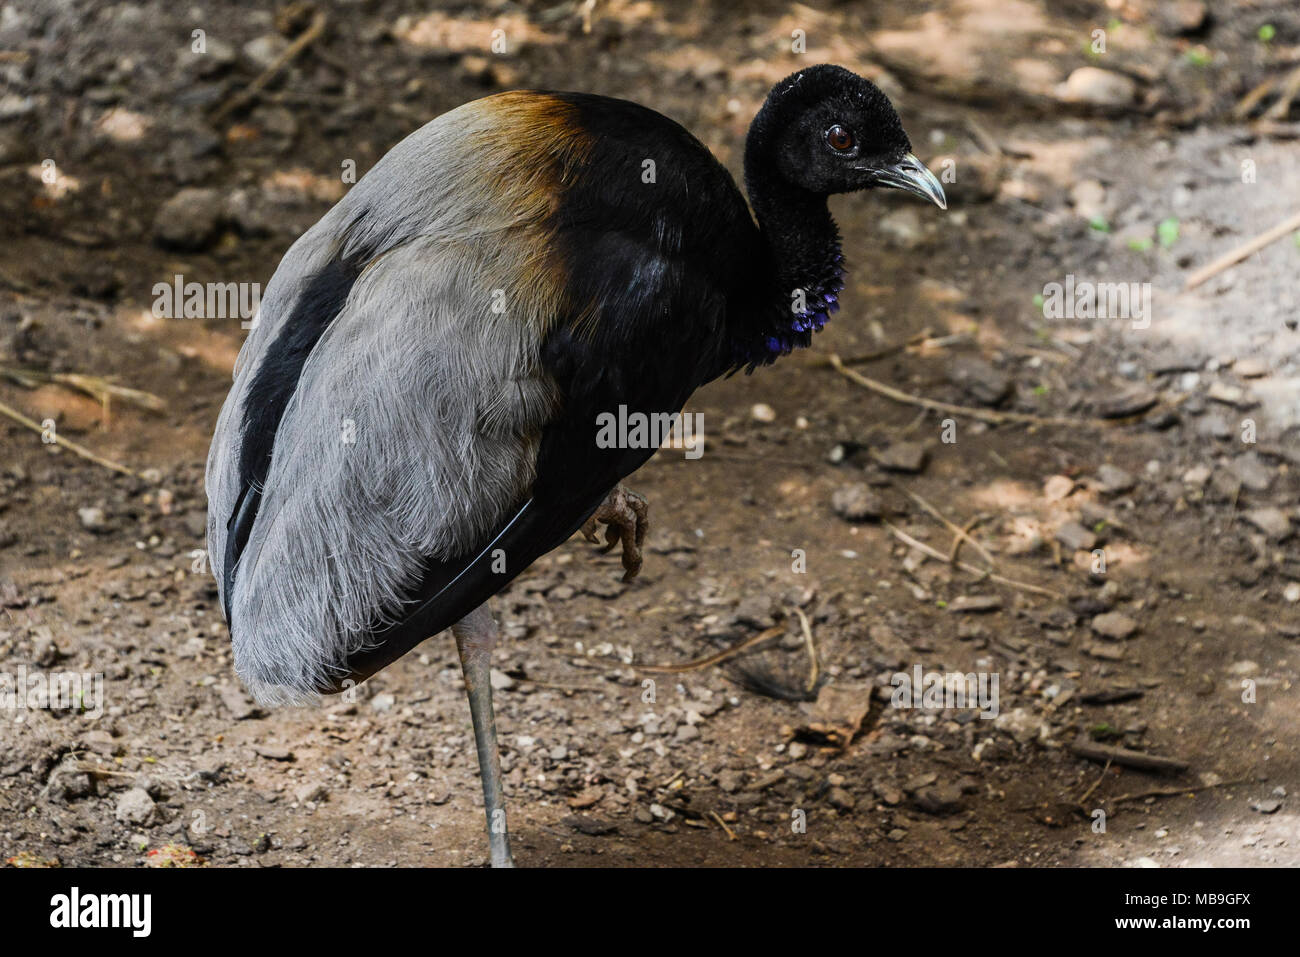 A grey-winged trumpeter (Psophia crepitans) standing on one leg in Cango Wildlife Ranch, South Africa Stock Photo